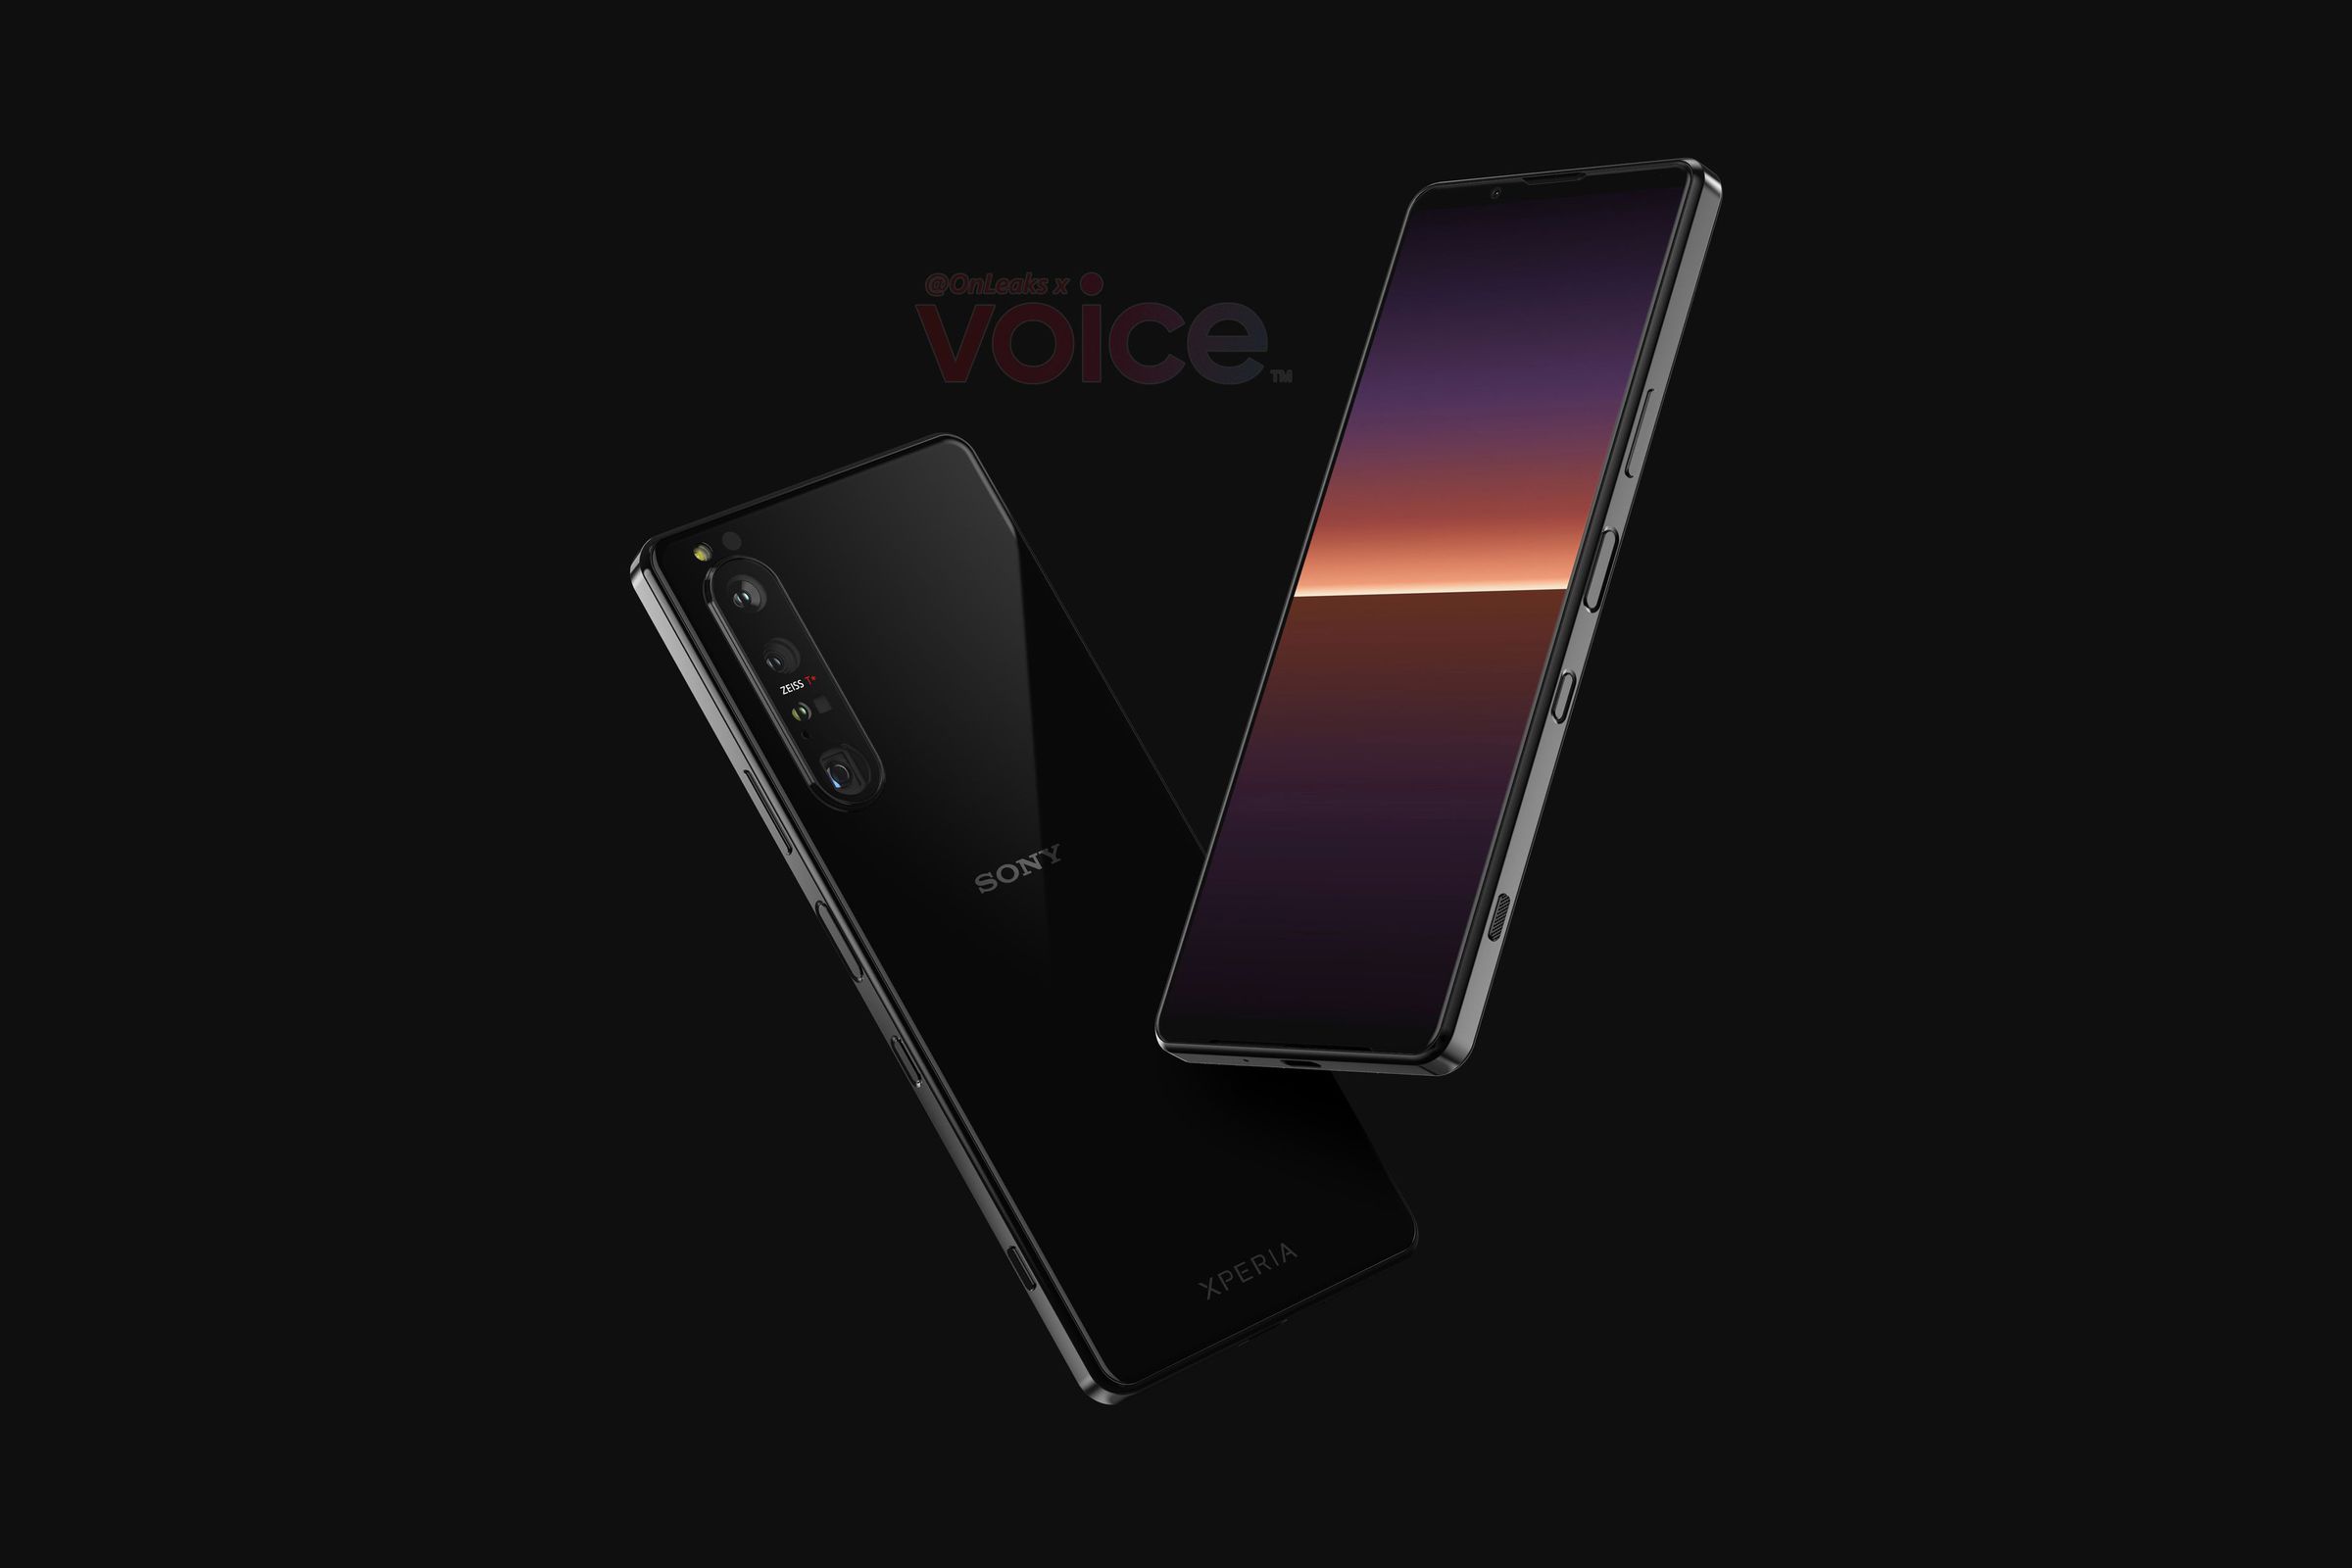 Alleged leaked renders of the upcoming Xperia 1 III.